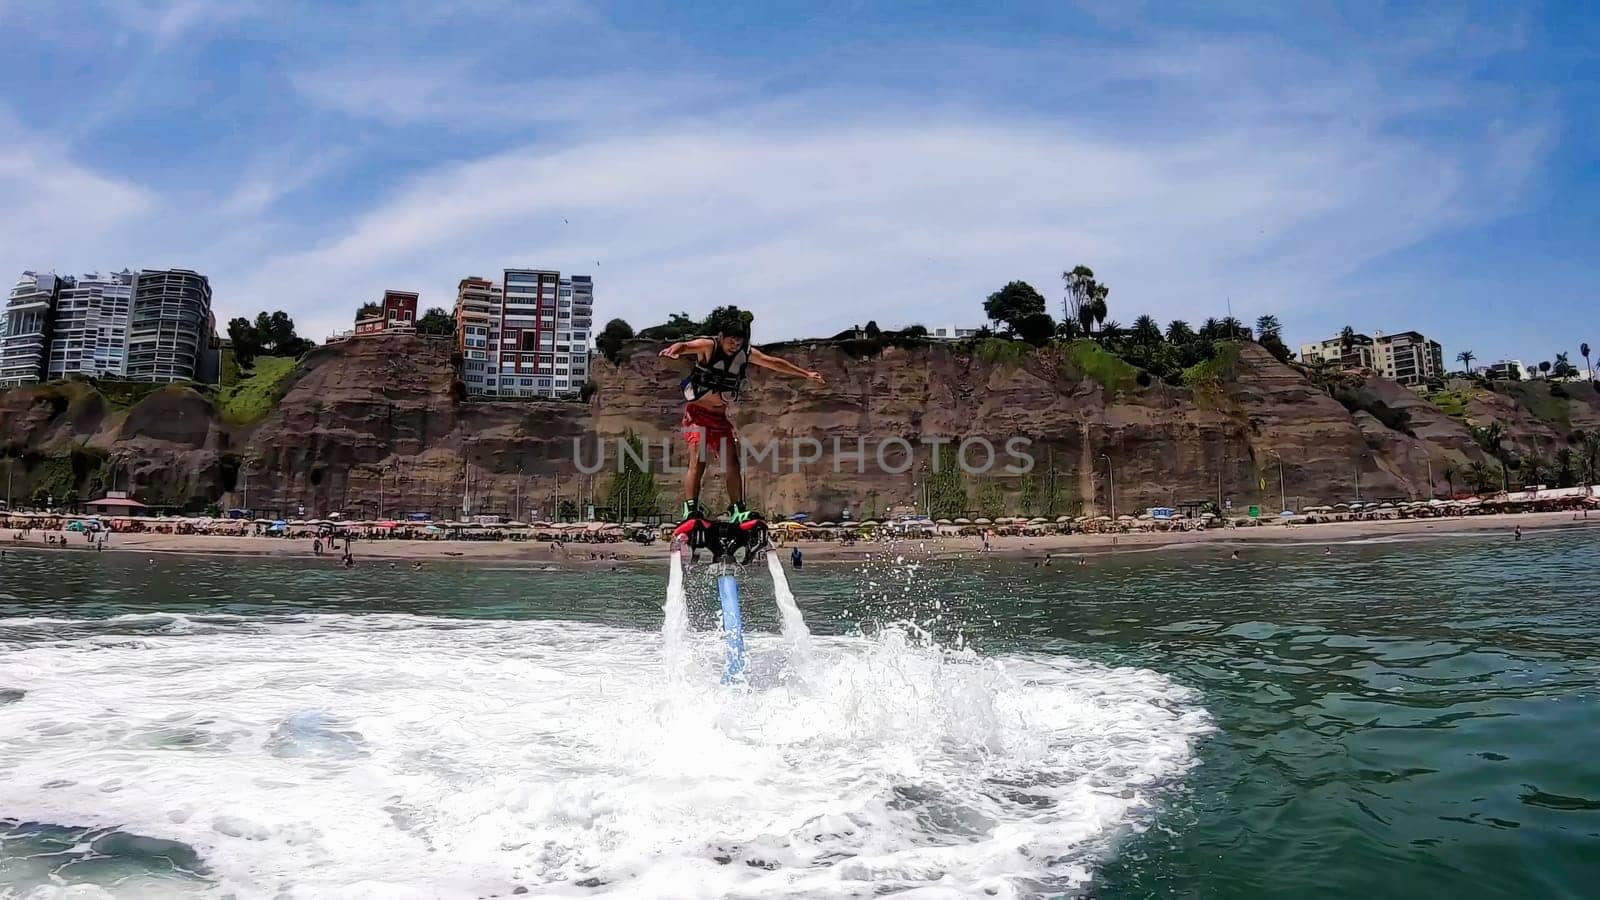 Thrilling display of flyboarding acrobatics with a coastal city backdrop